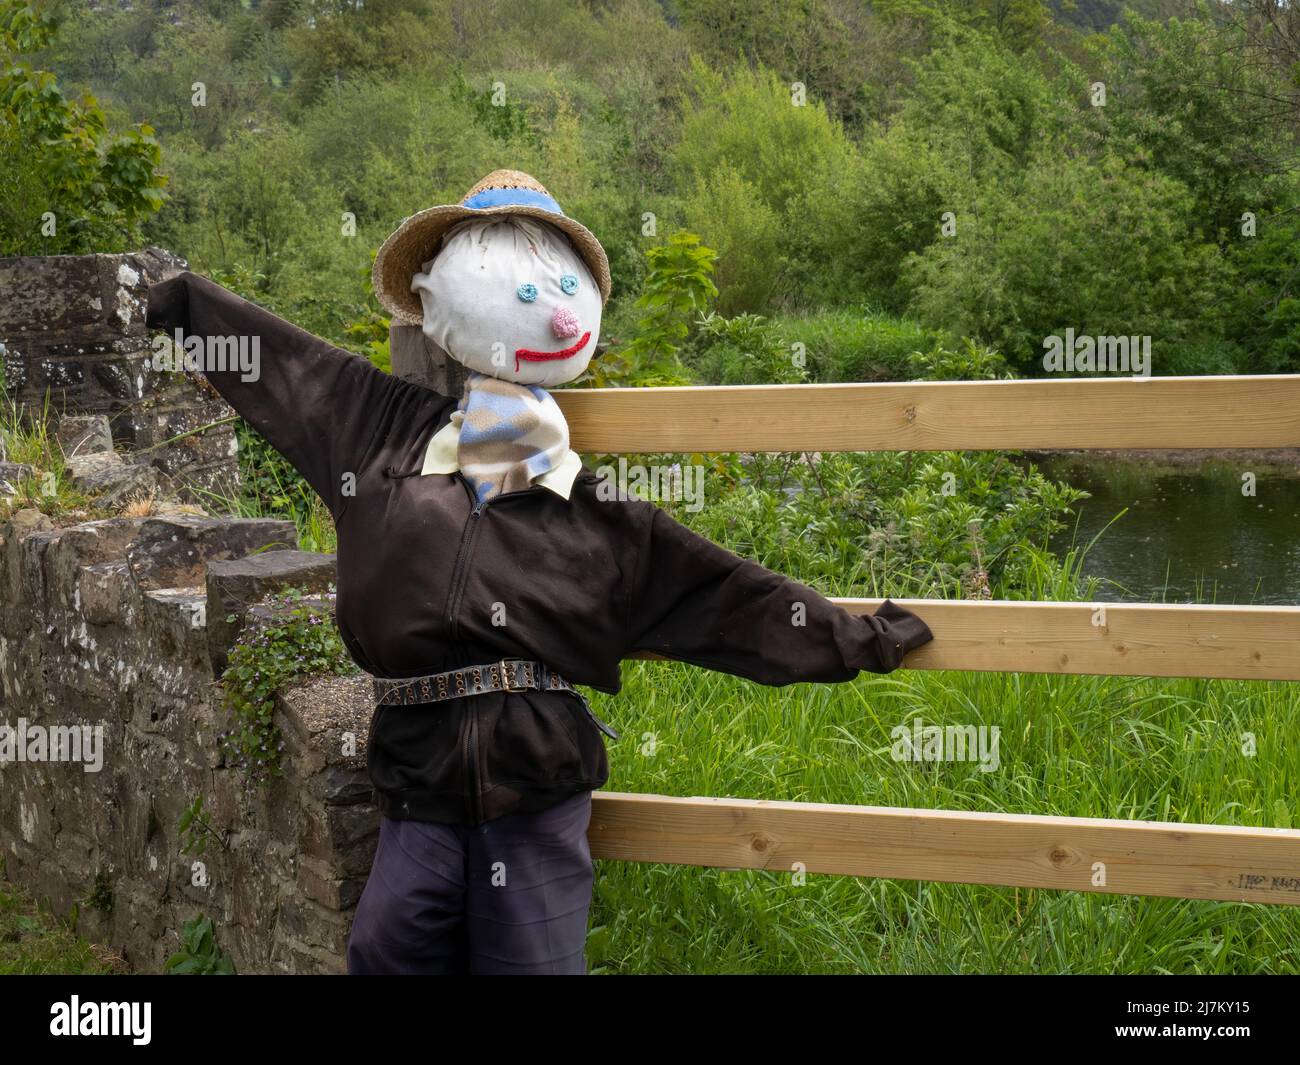 Scarecrow by gate in rural setting. Stock Photo